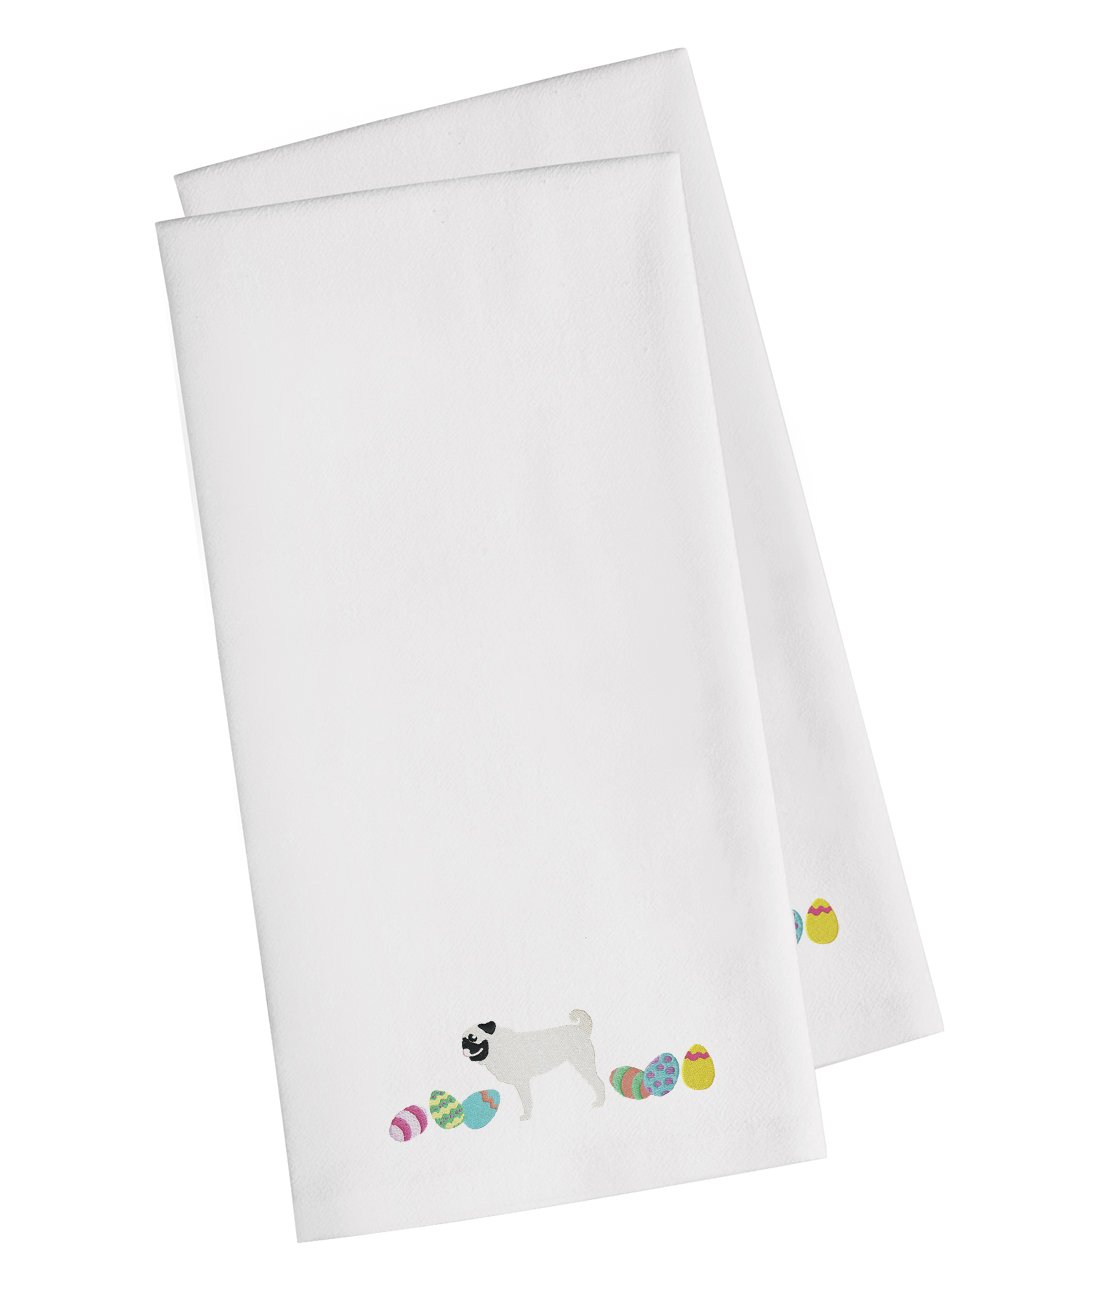 Pug Easter White Embroidered Kitchen Towel Set of 2 CK1675WHTWE by Caroline's Treasures